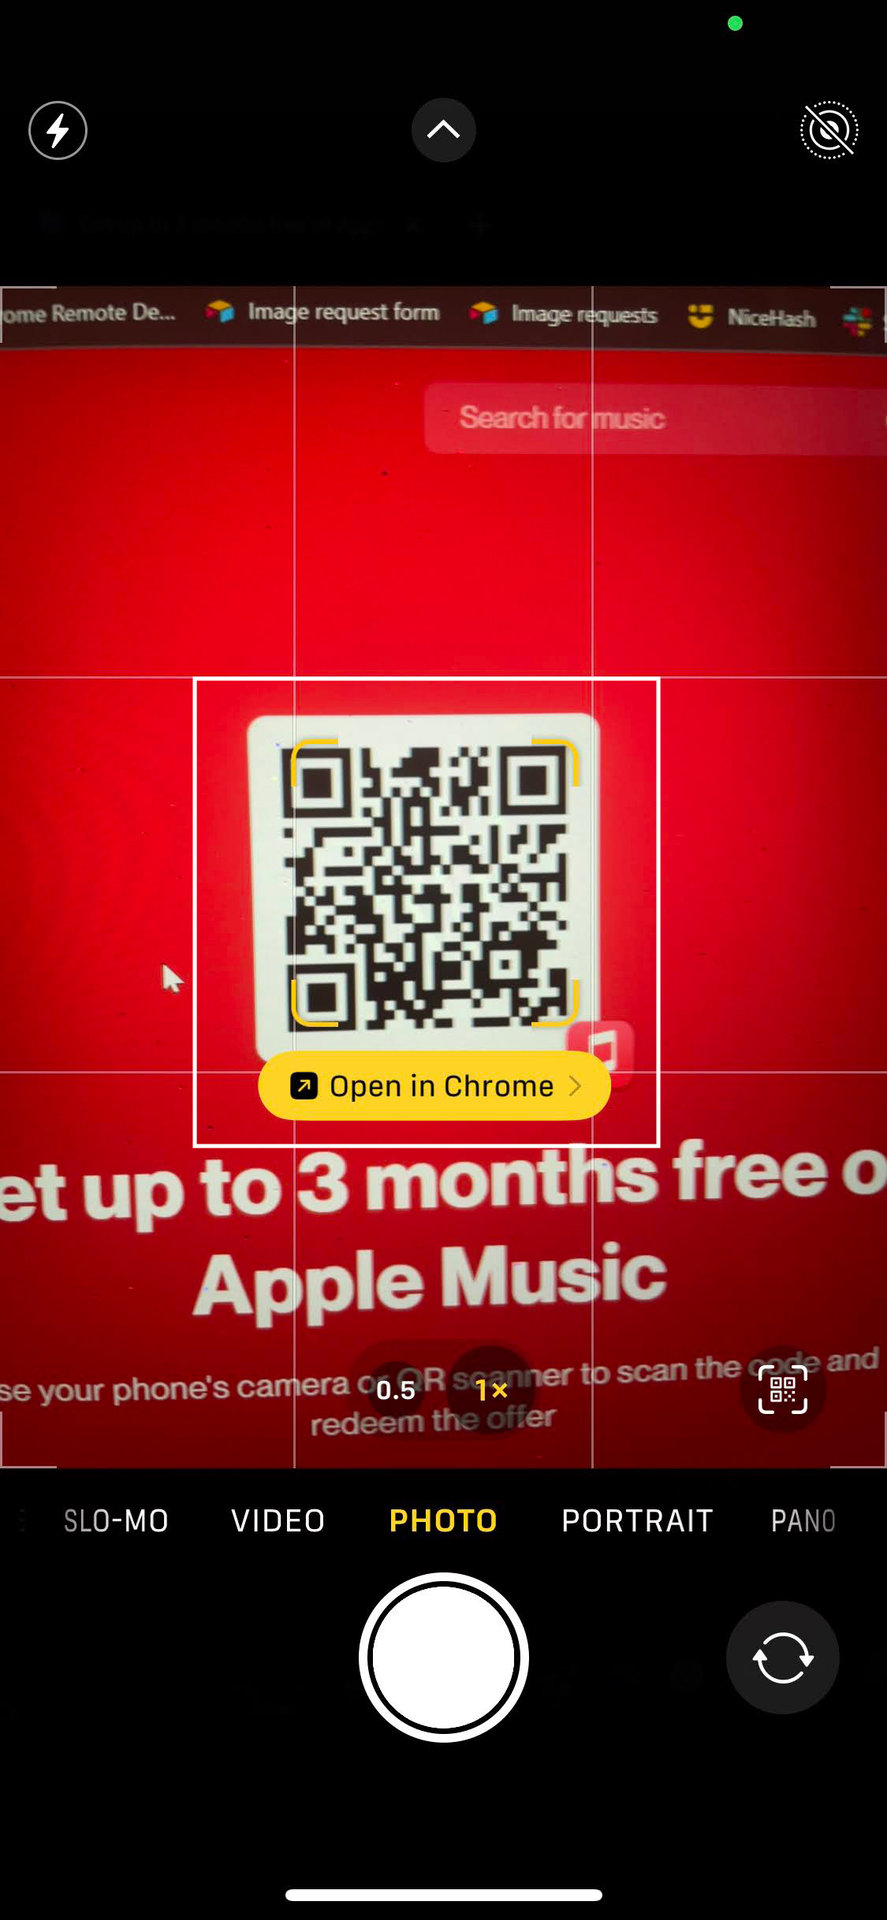 How to redeem free Apple Music from Shazam 1